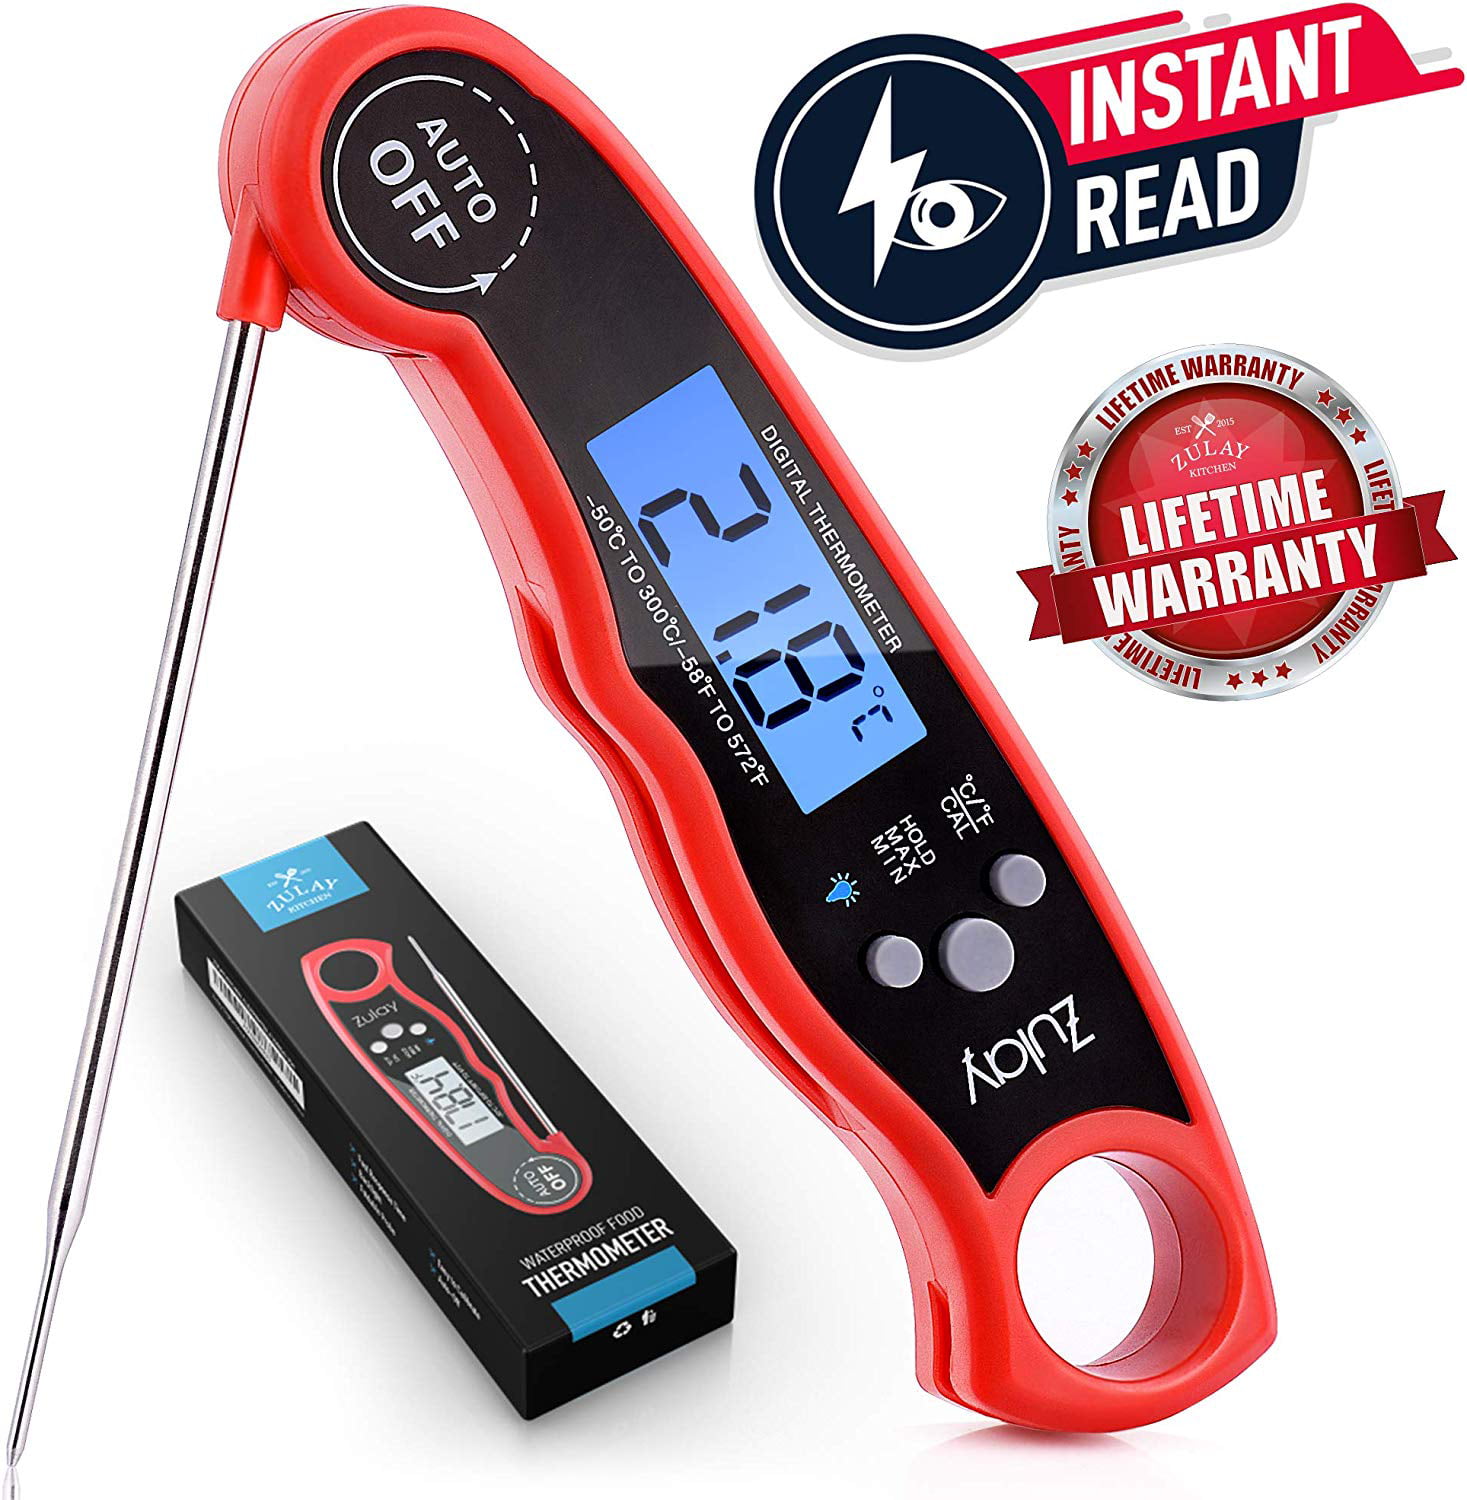 Instant meat thermometer